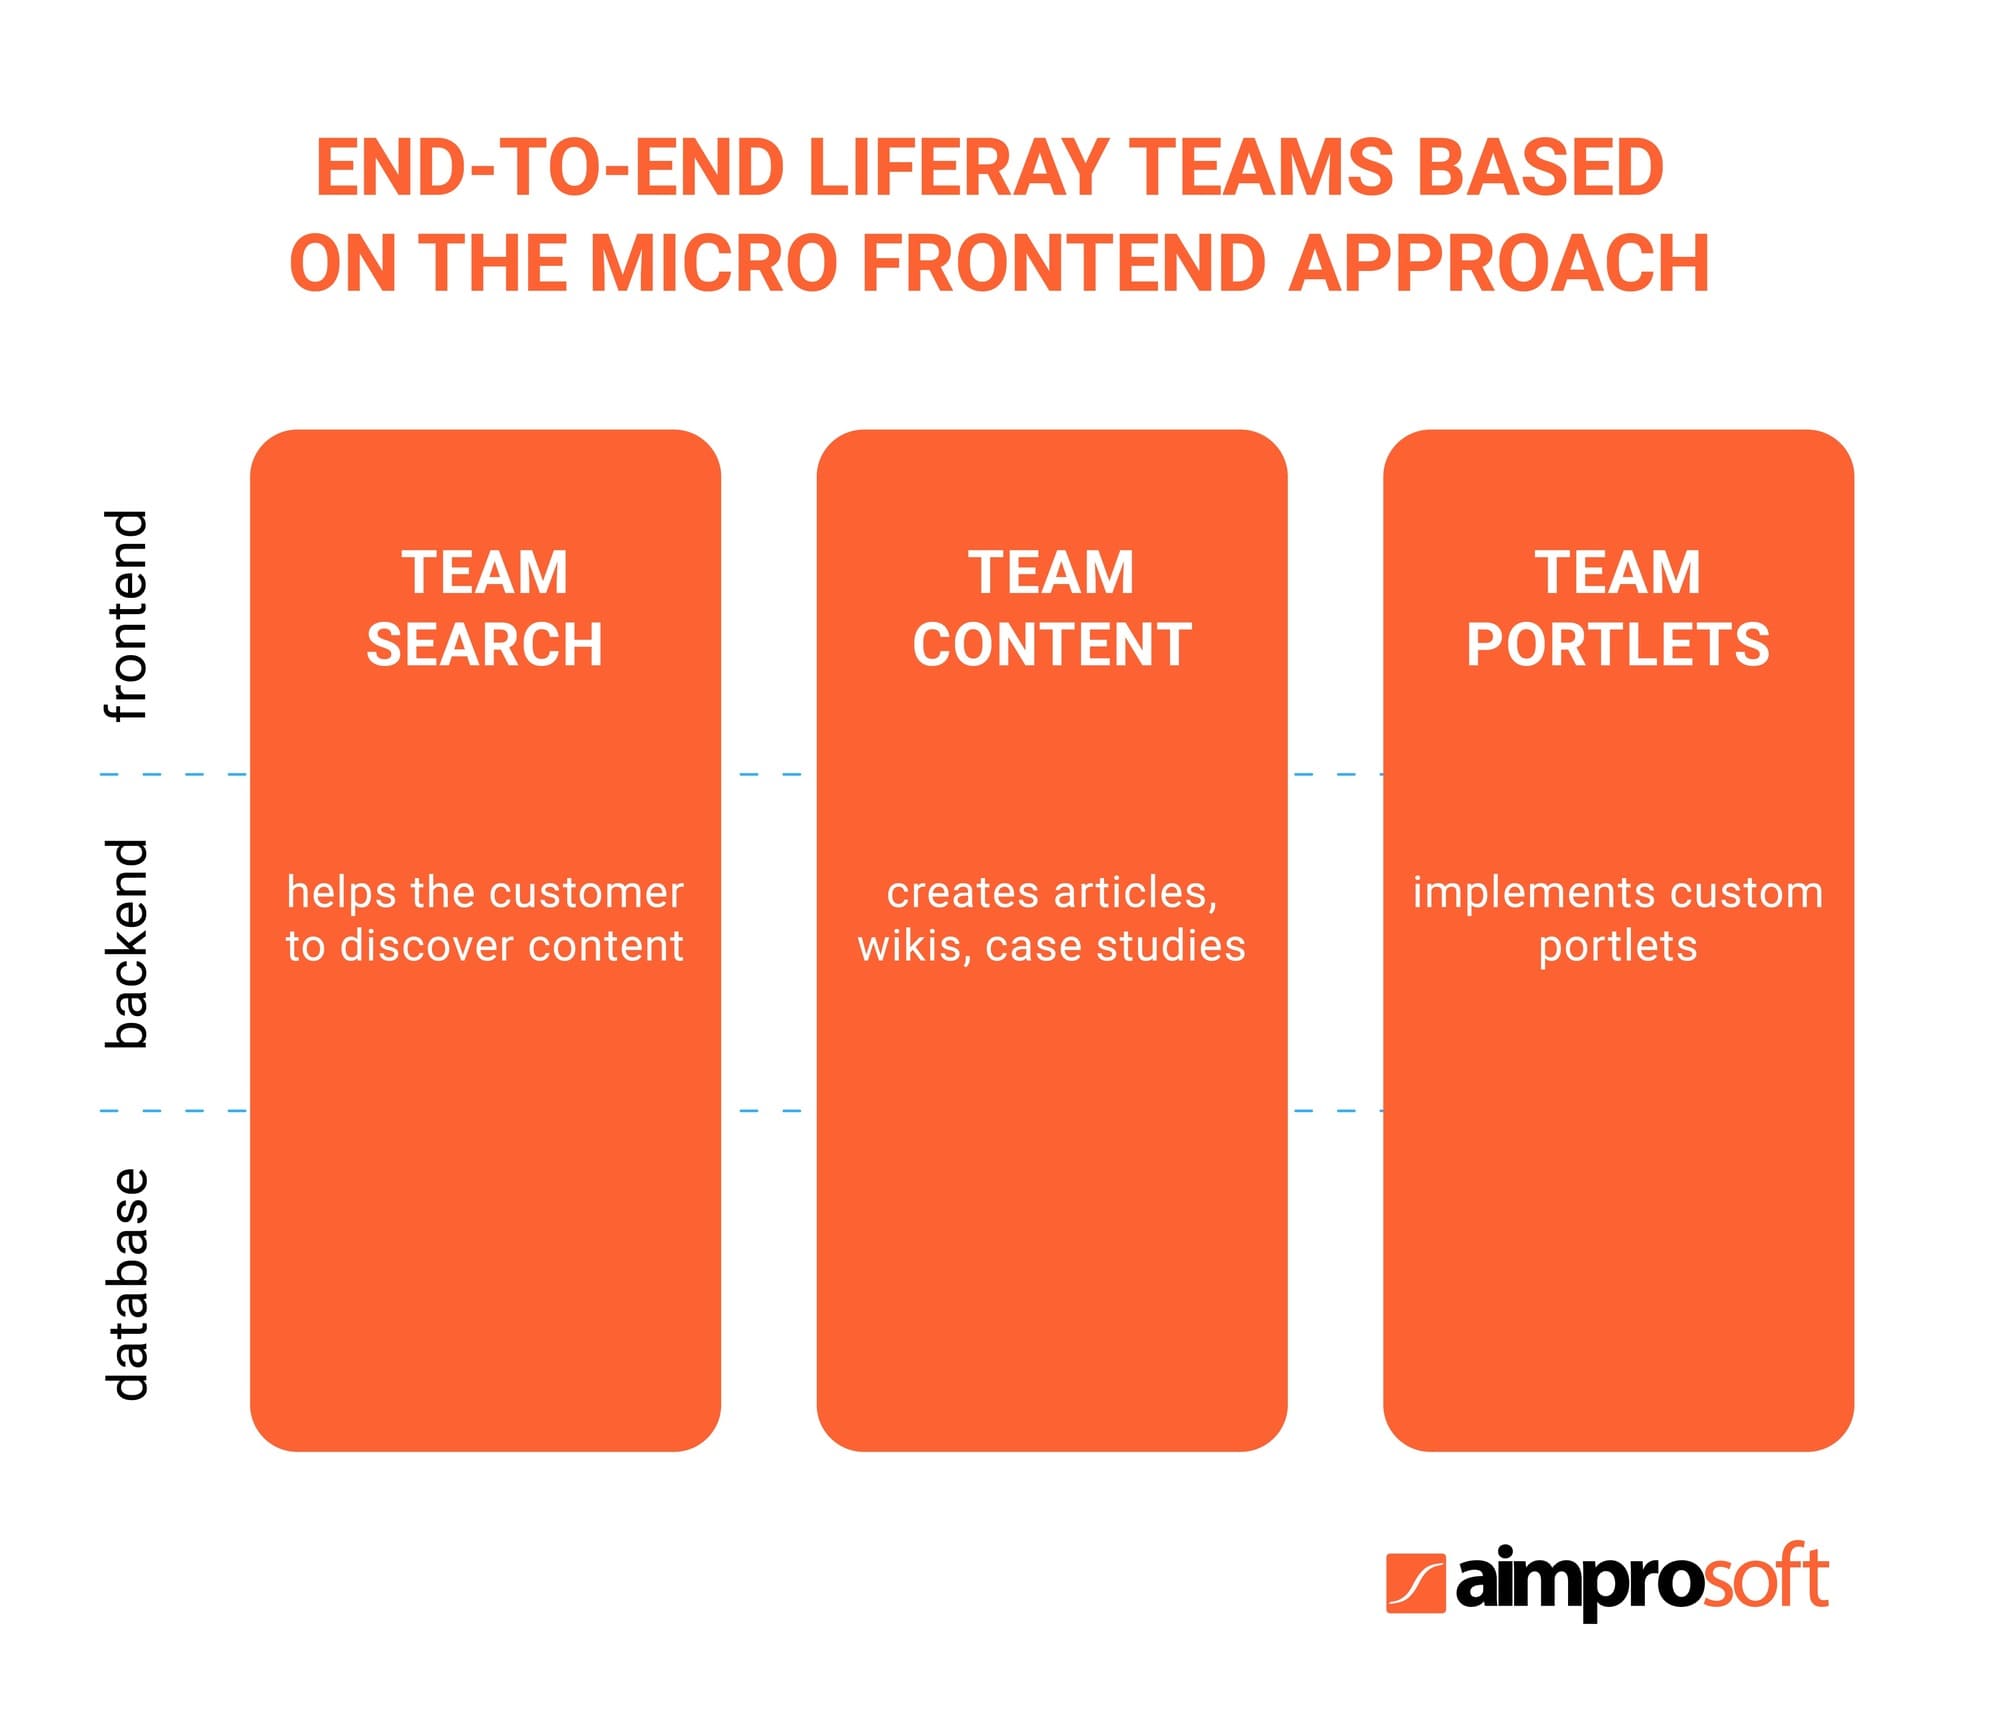 Micro frontend approach in Liferay DXP projects